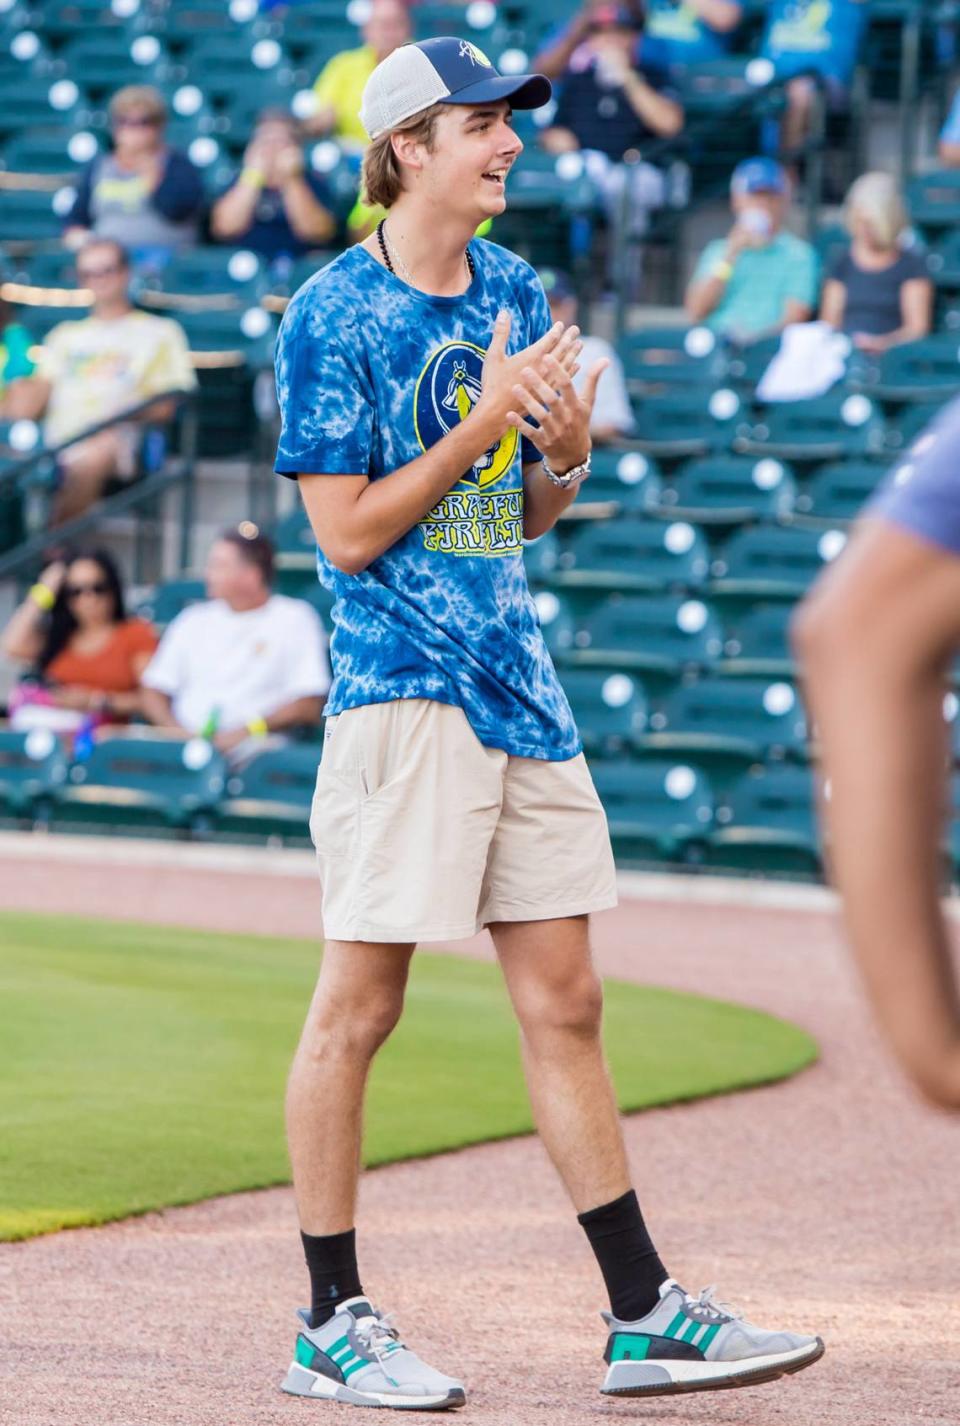 CJ Yarborough started as a batboy for the Columbia Fireflies during the minor league team’s first season in 2016.